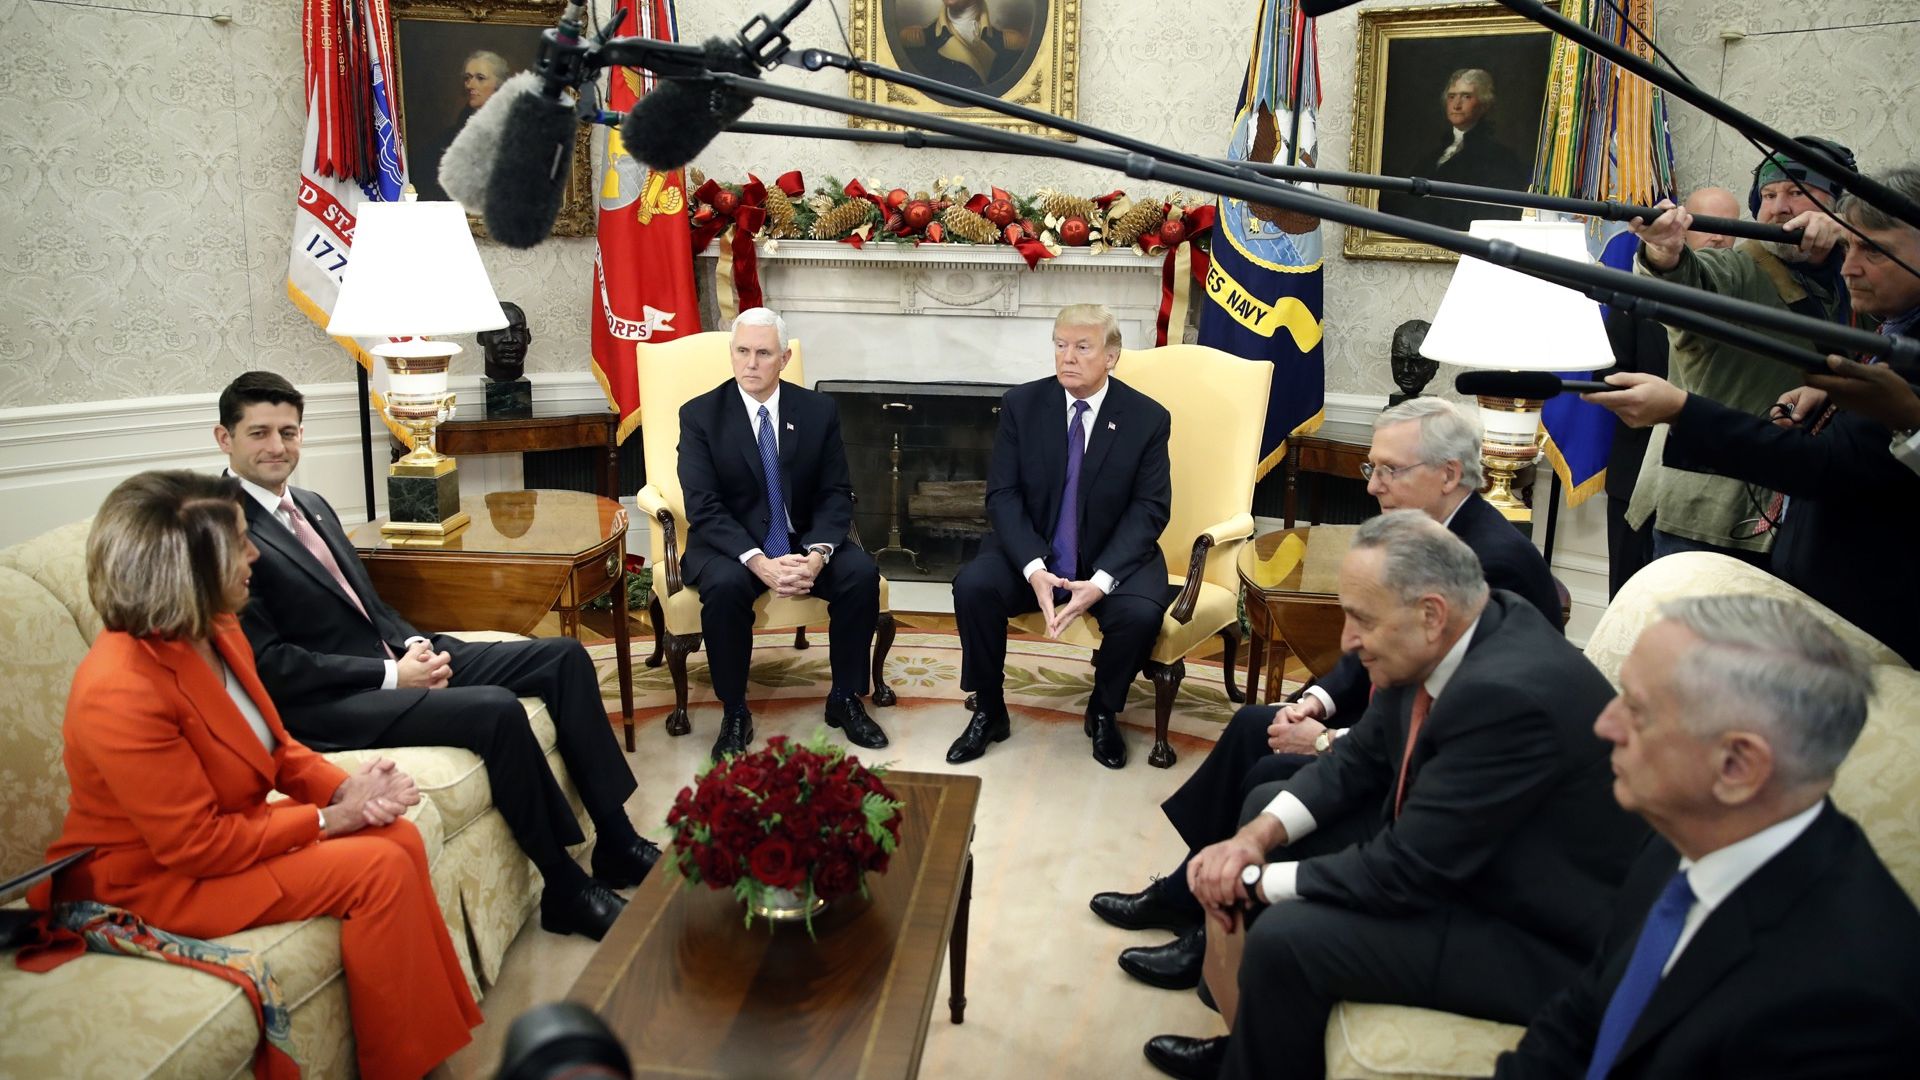 President Trump meets with bipartisan congressional leaders in the Oval Office